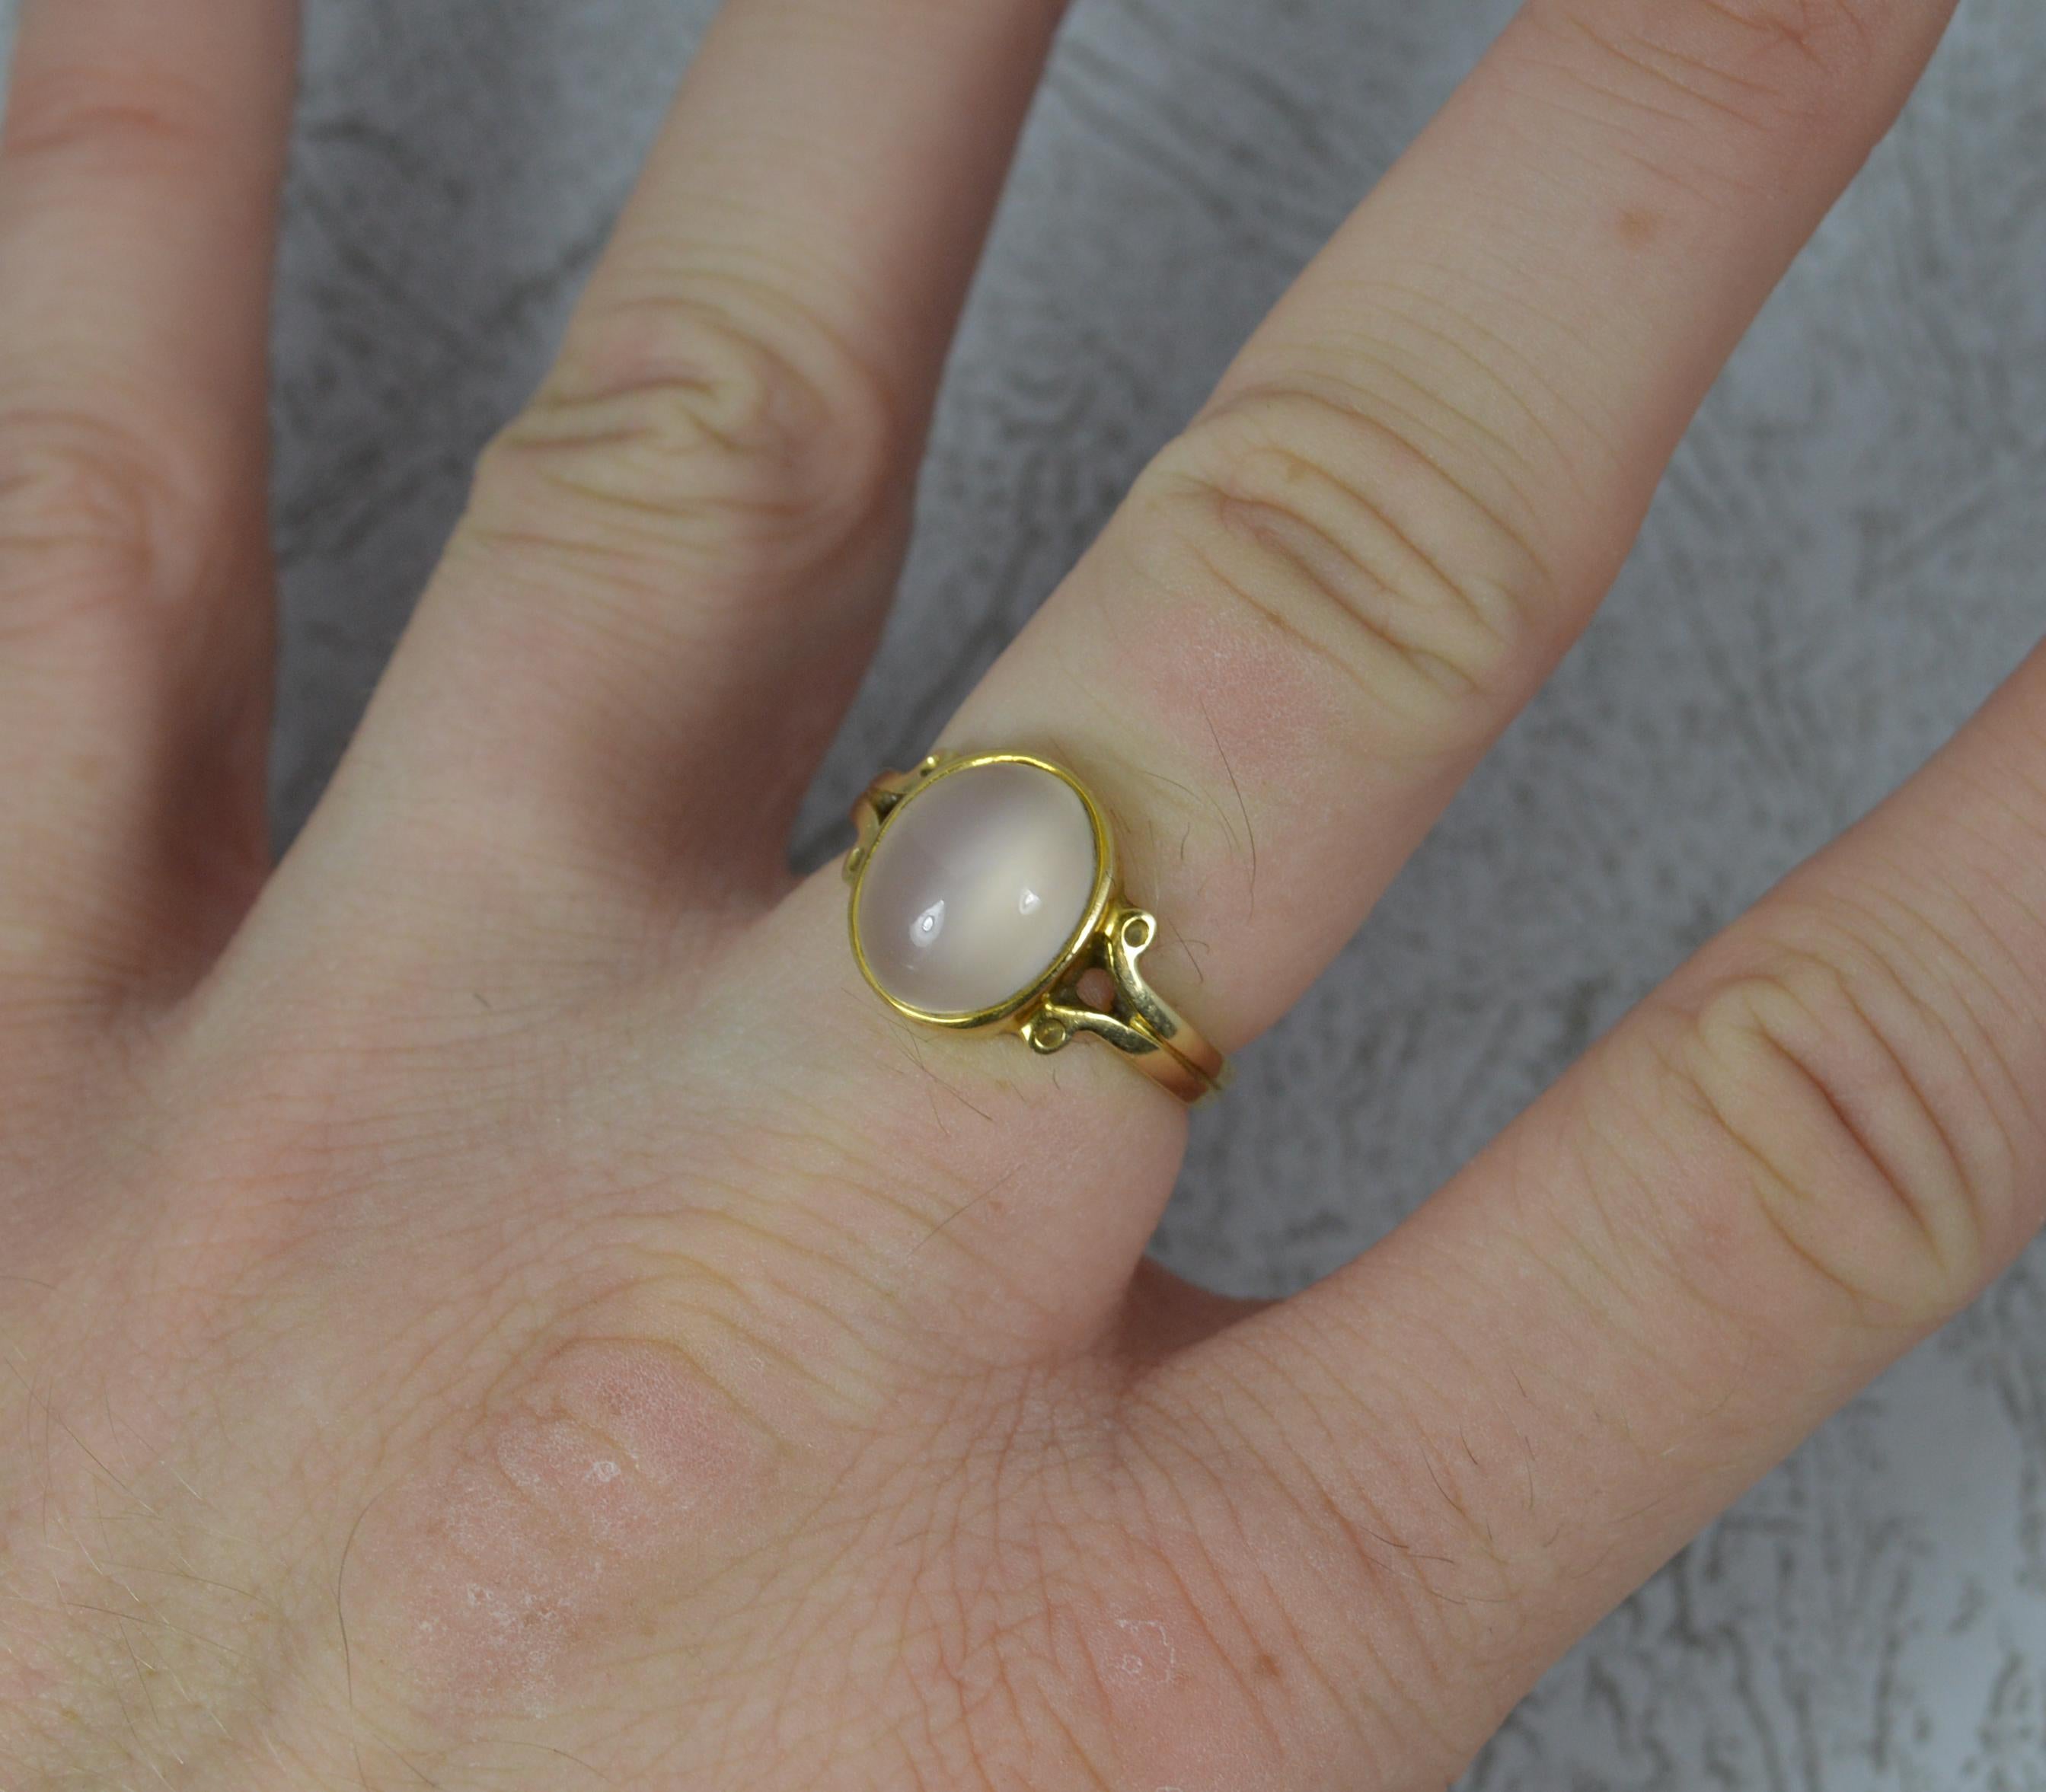 A superb vintage ring.
Solid 14 carat yellow gold example.
Set with an oval shaped moonstone. 9.2mm x 11.4mm approx.

CONDITION ; Excellent. Well set stone. Clean and solid band. Issue free. Please view photographs.
WEIGHT ; 3.8 grams
SIZE ; N UK, 6